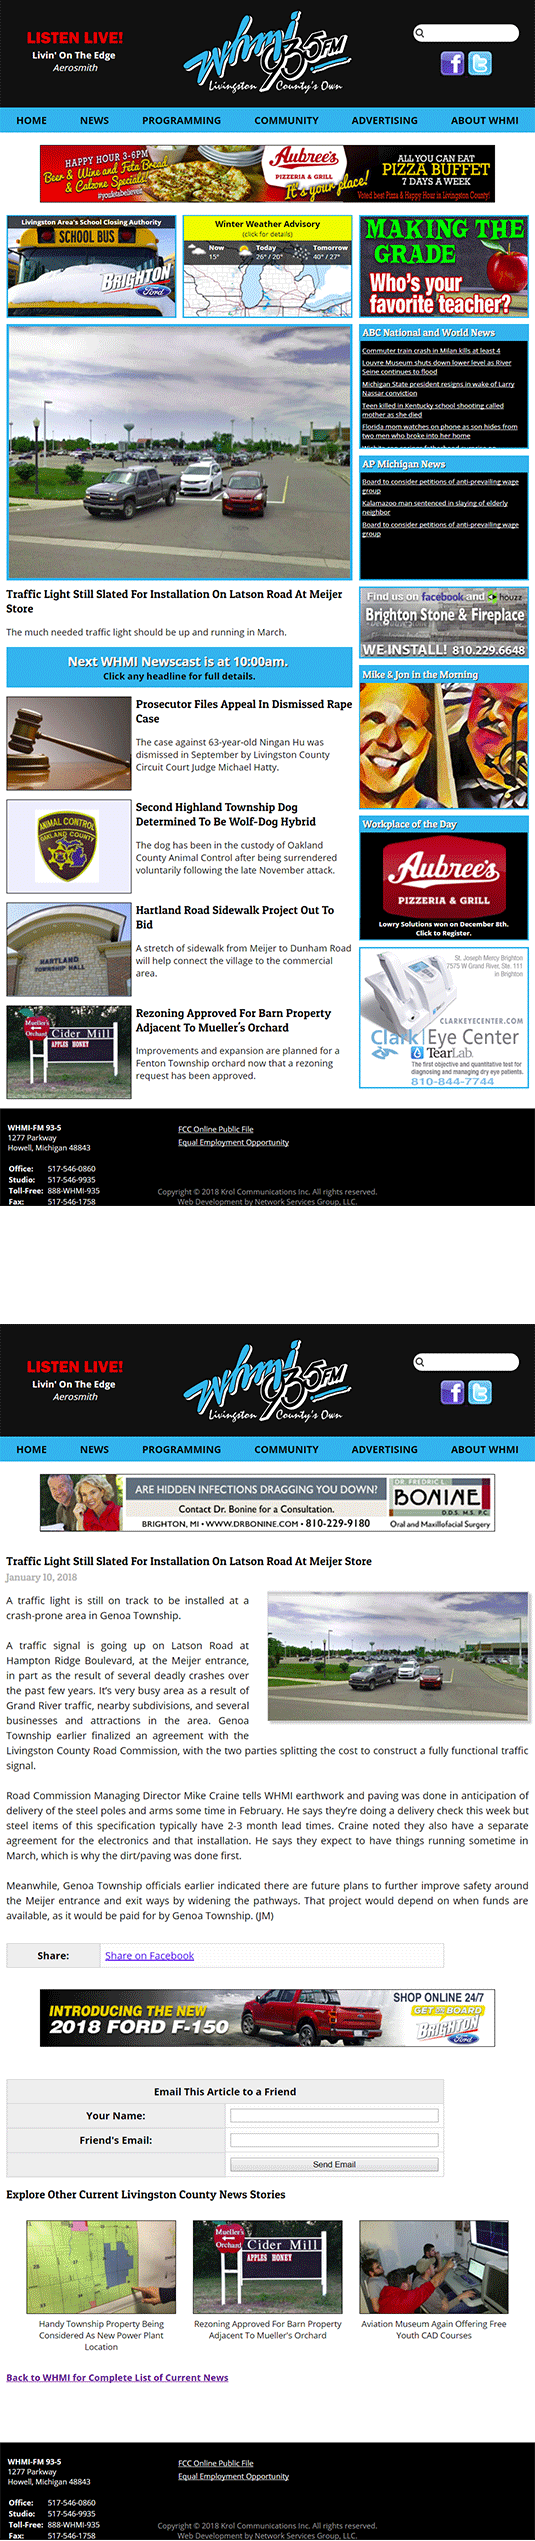 WHMI Home Page and News Page Sample